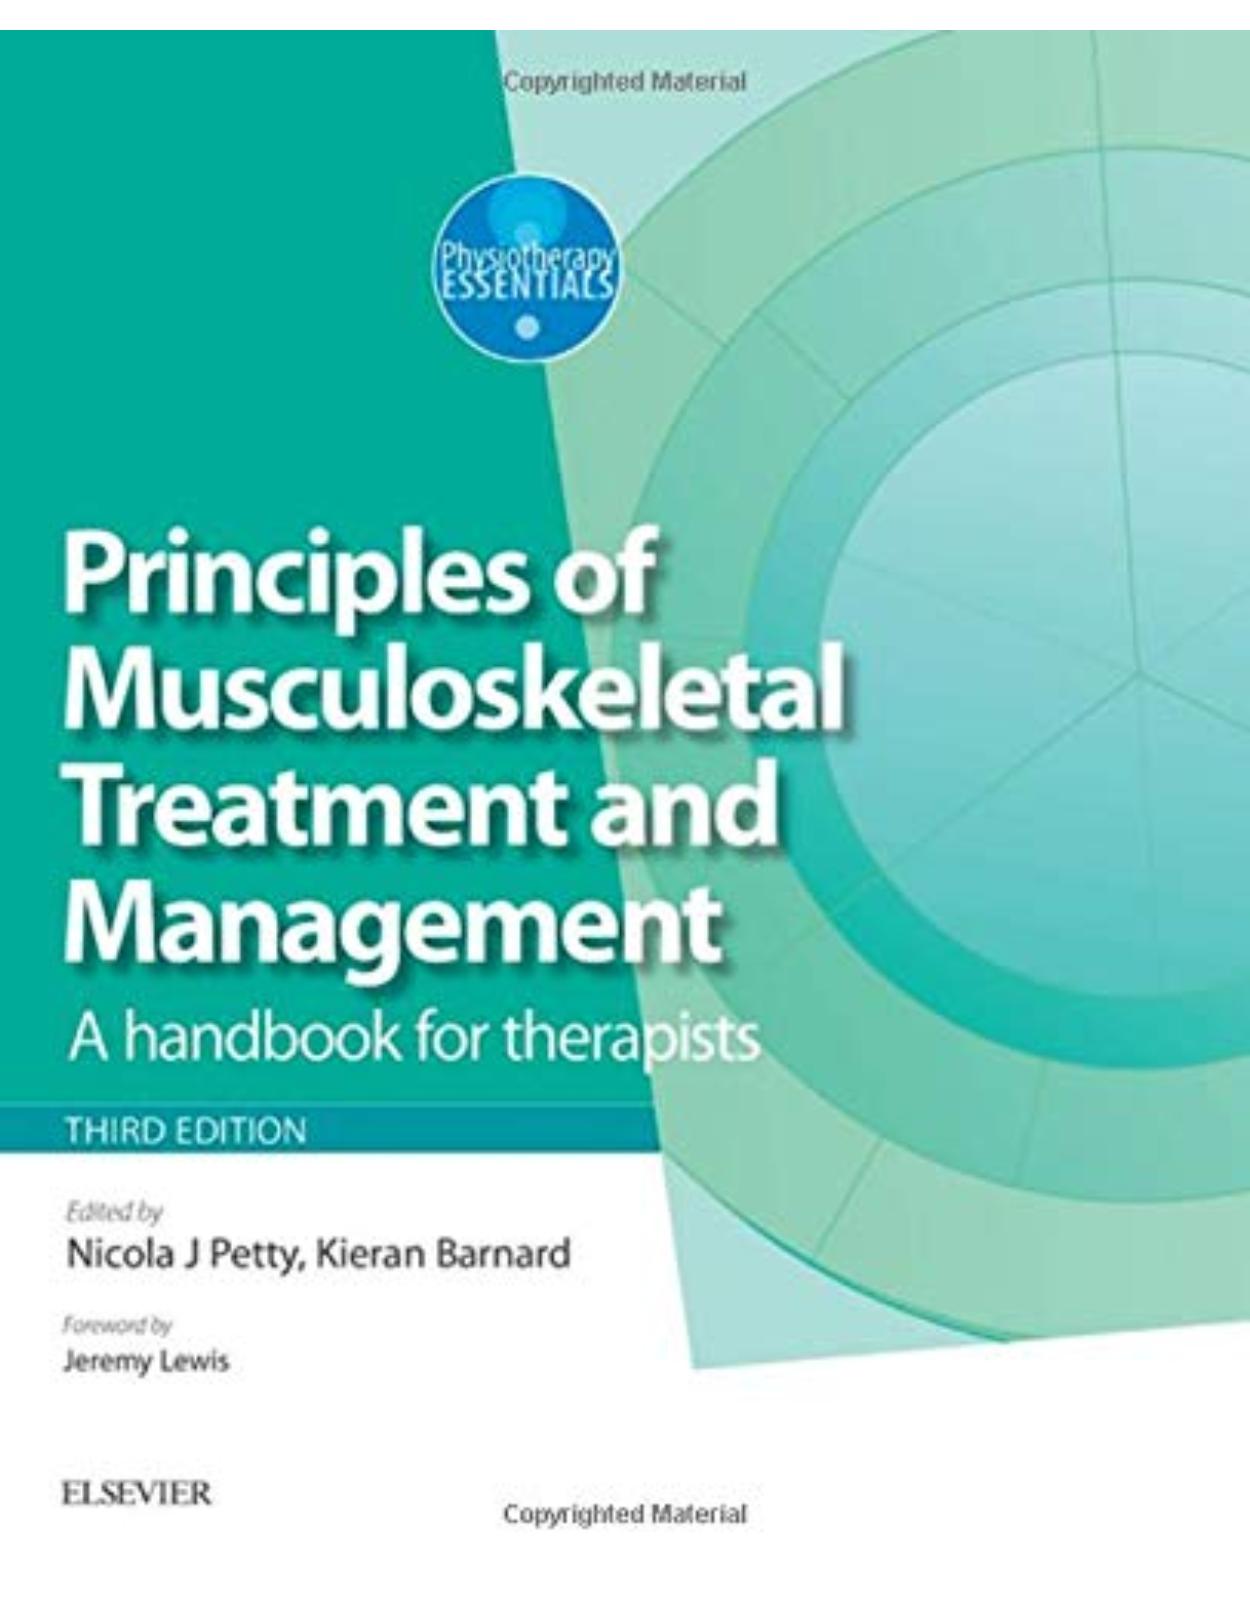 Principles of Musculoskeletal Treatment and Management - Volume 2: A Handbook for Therapists, 3e